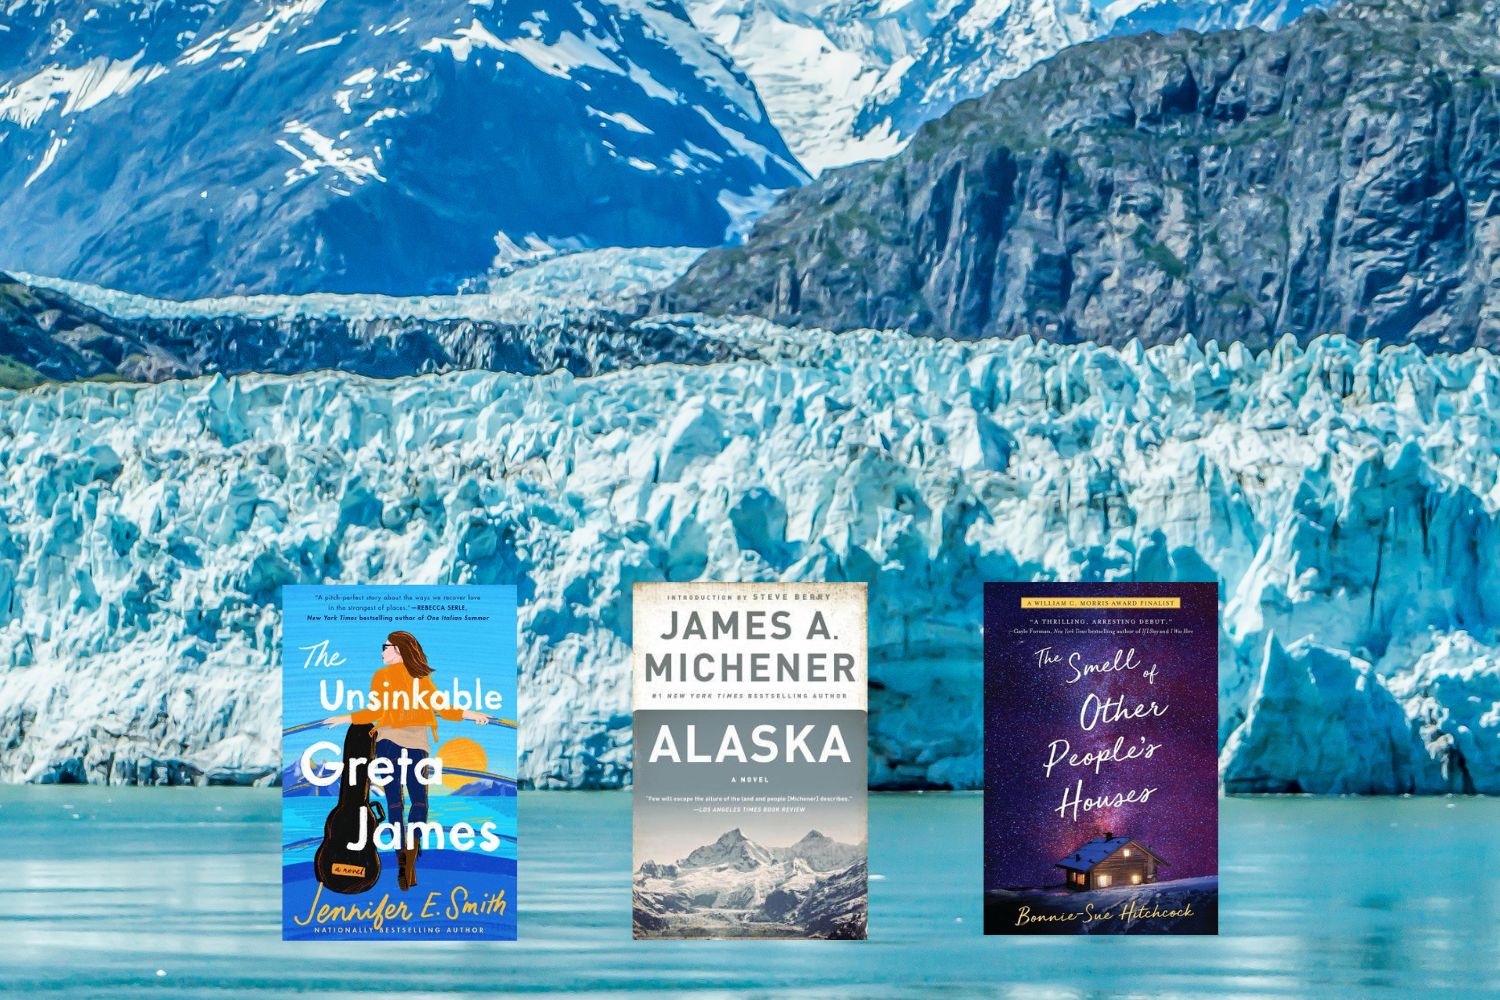 Alaska water and mountains overlay with three books